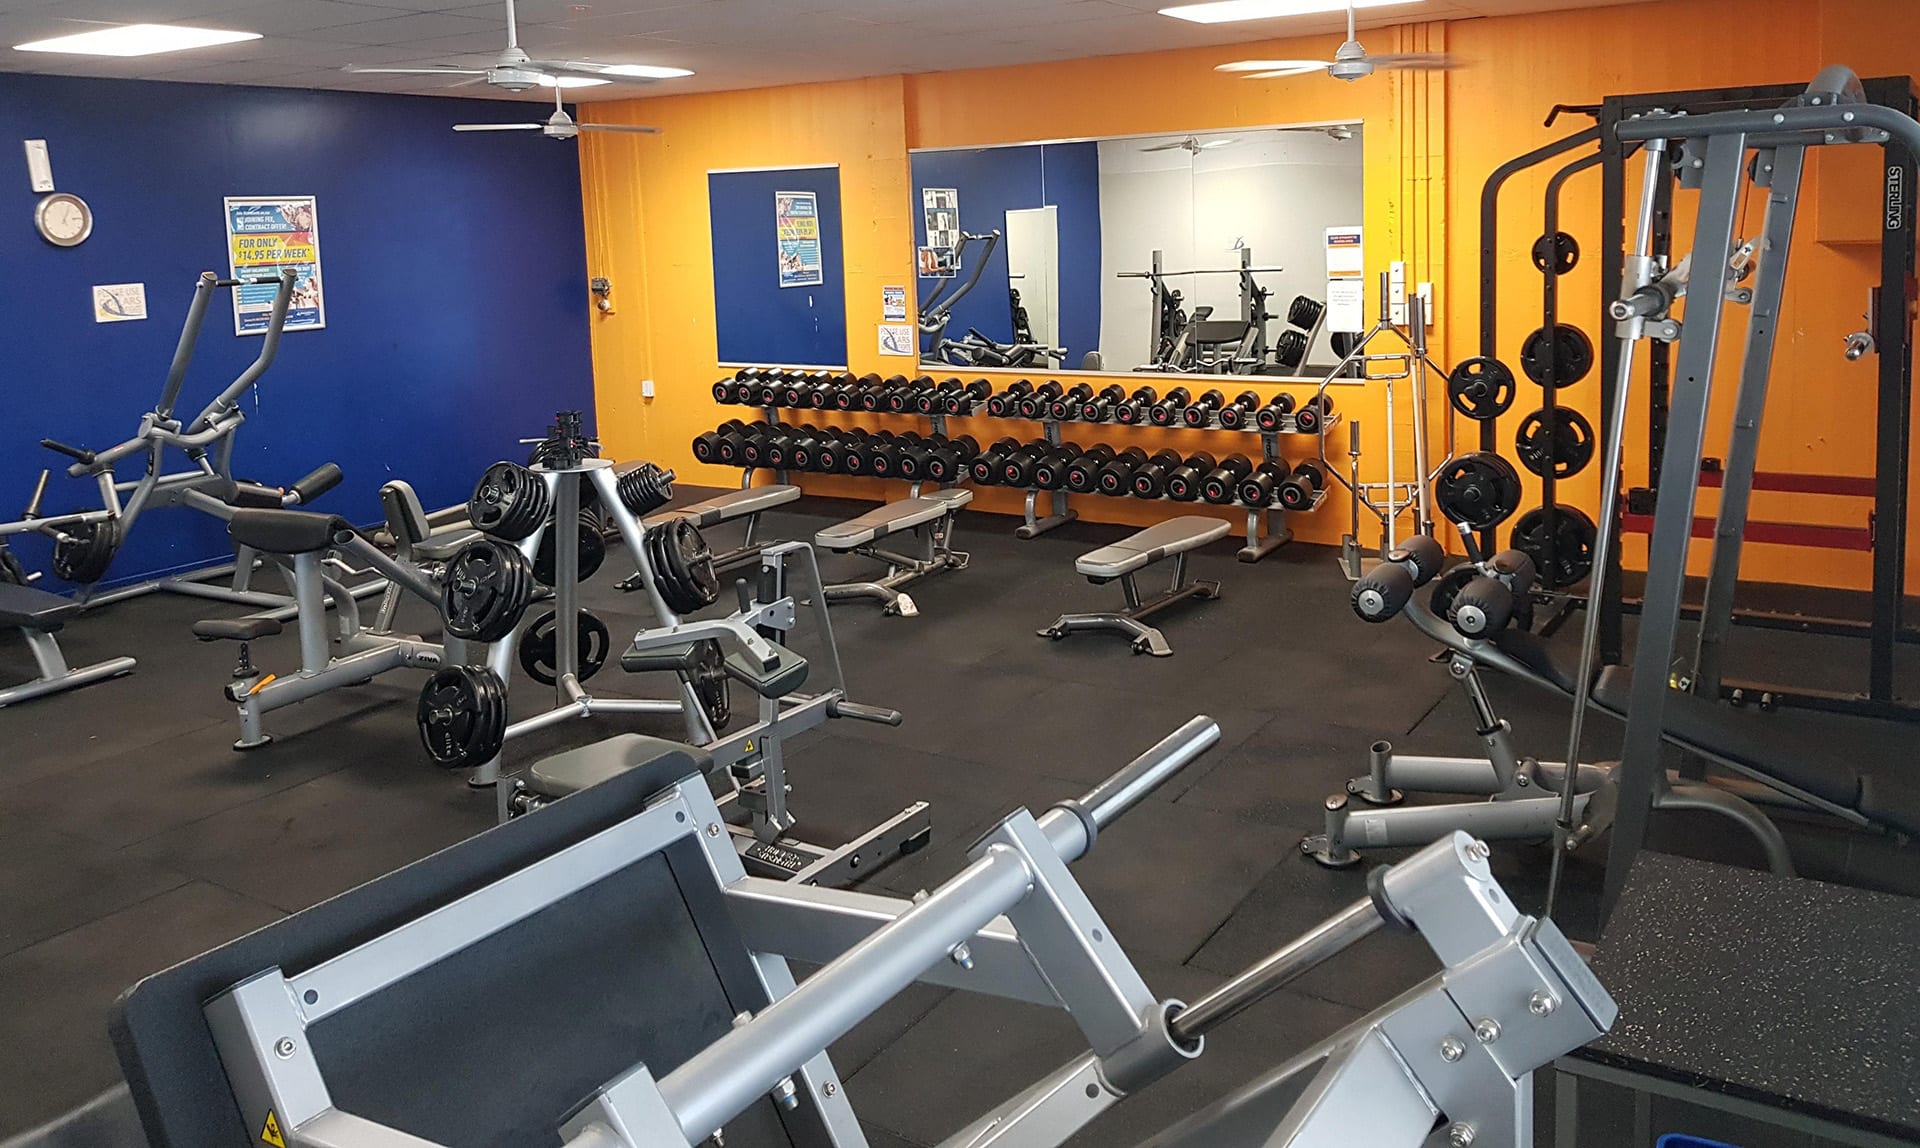 Advance Fitness Invercargill Gym Weights Room